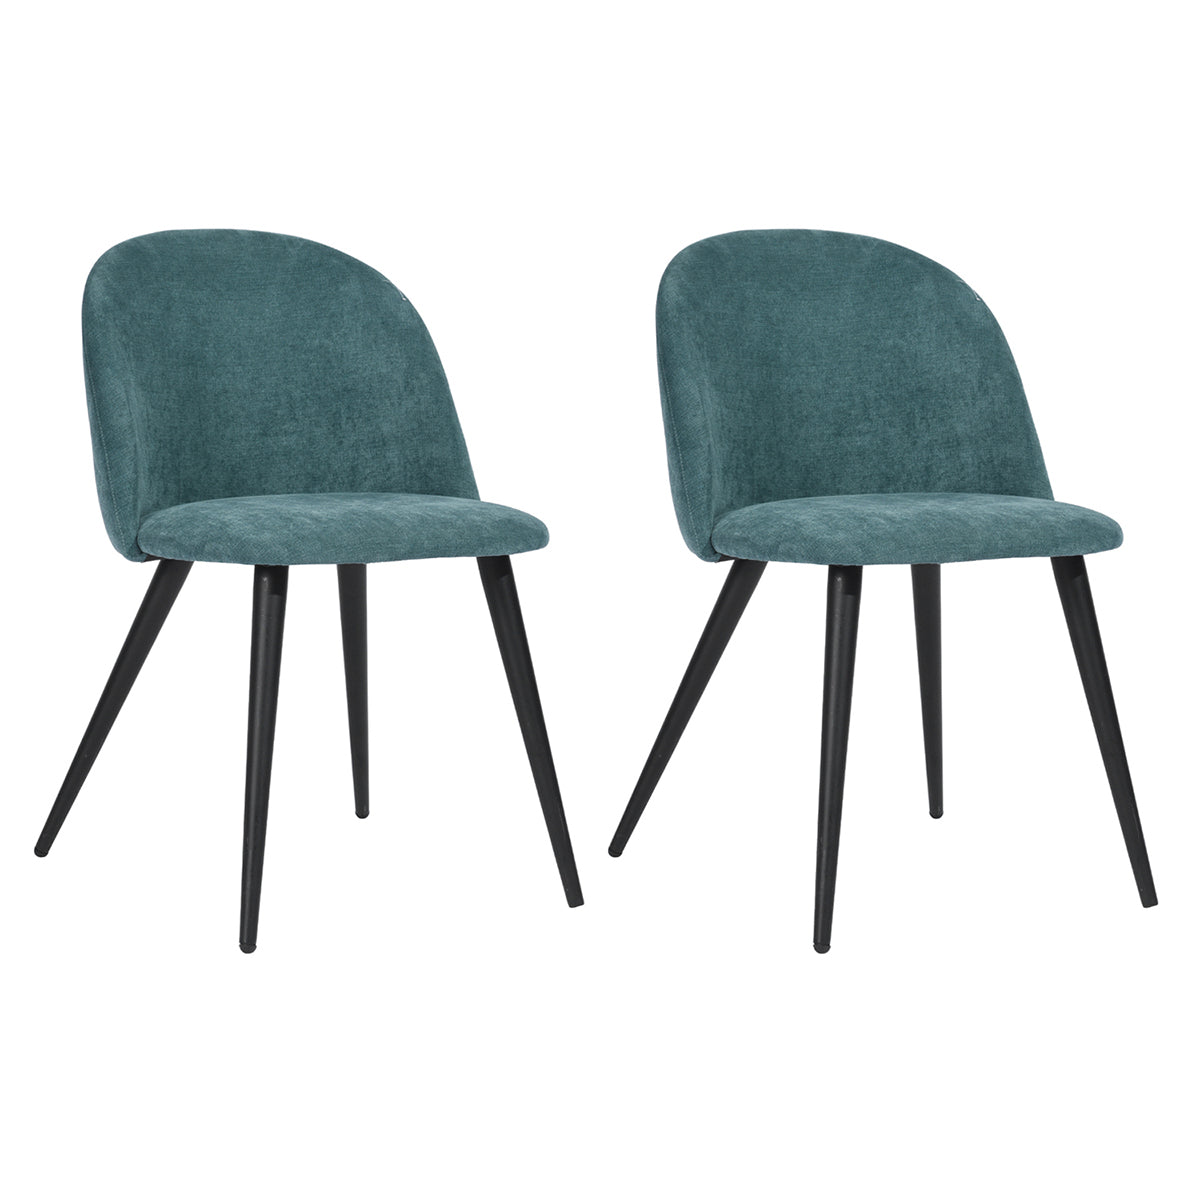 Upholstered Arm Chair/Dining Chairs set of 2